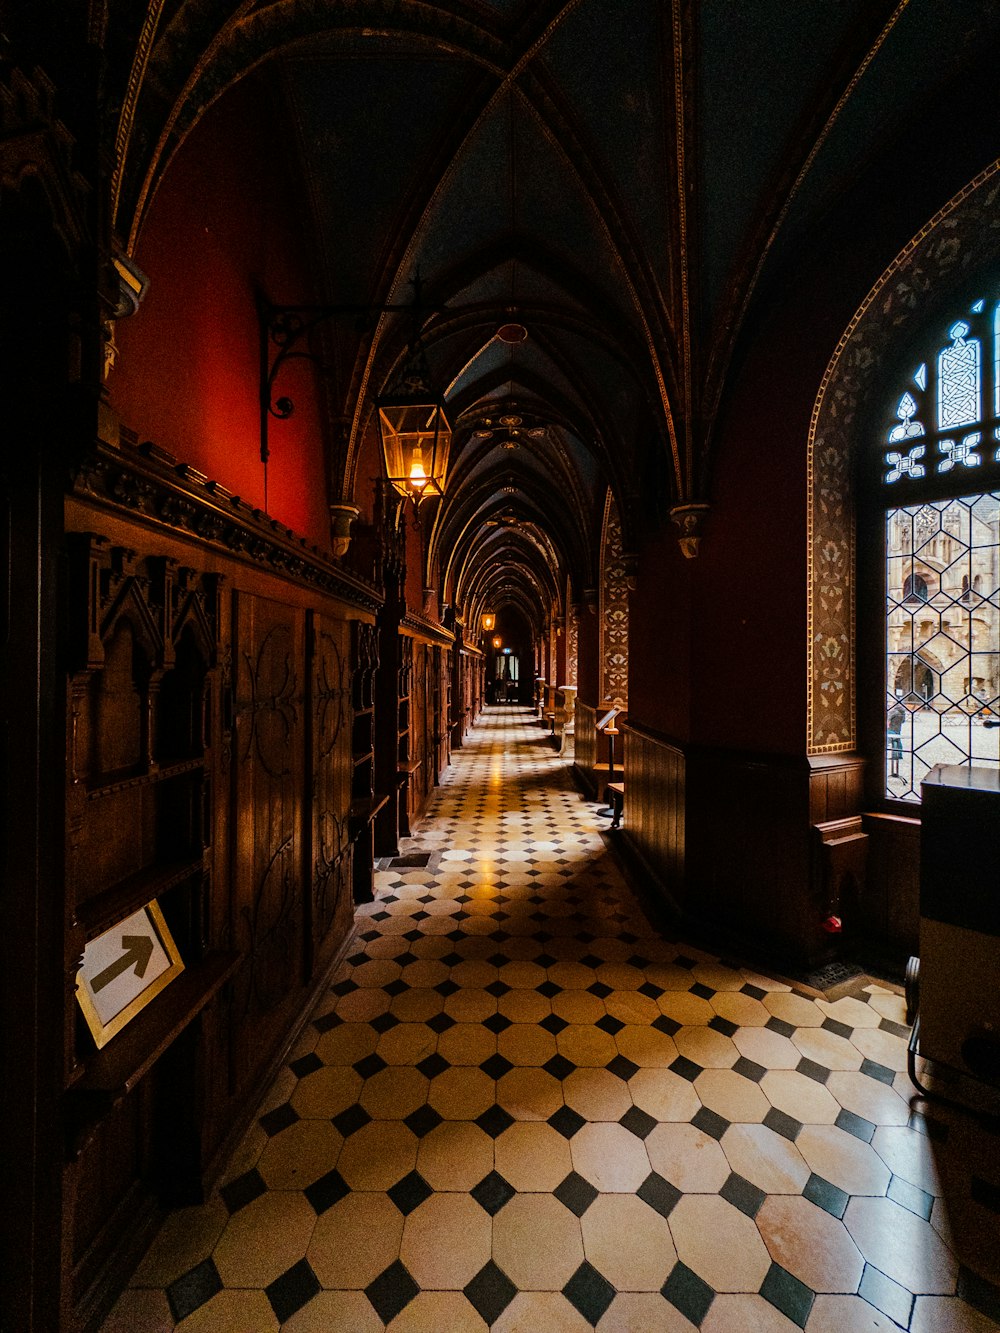 a long hallway with a checkered floor and arched windows